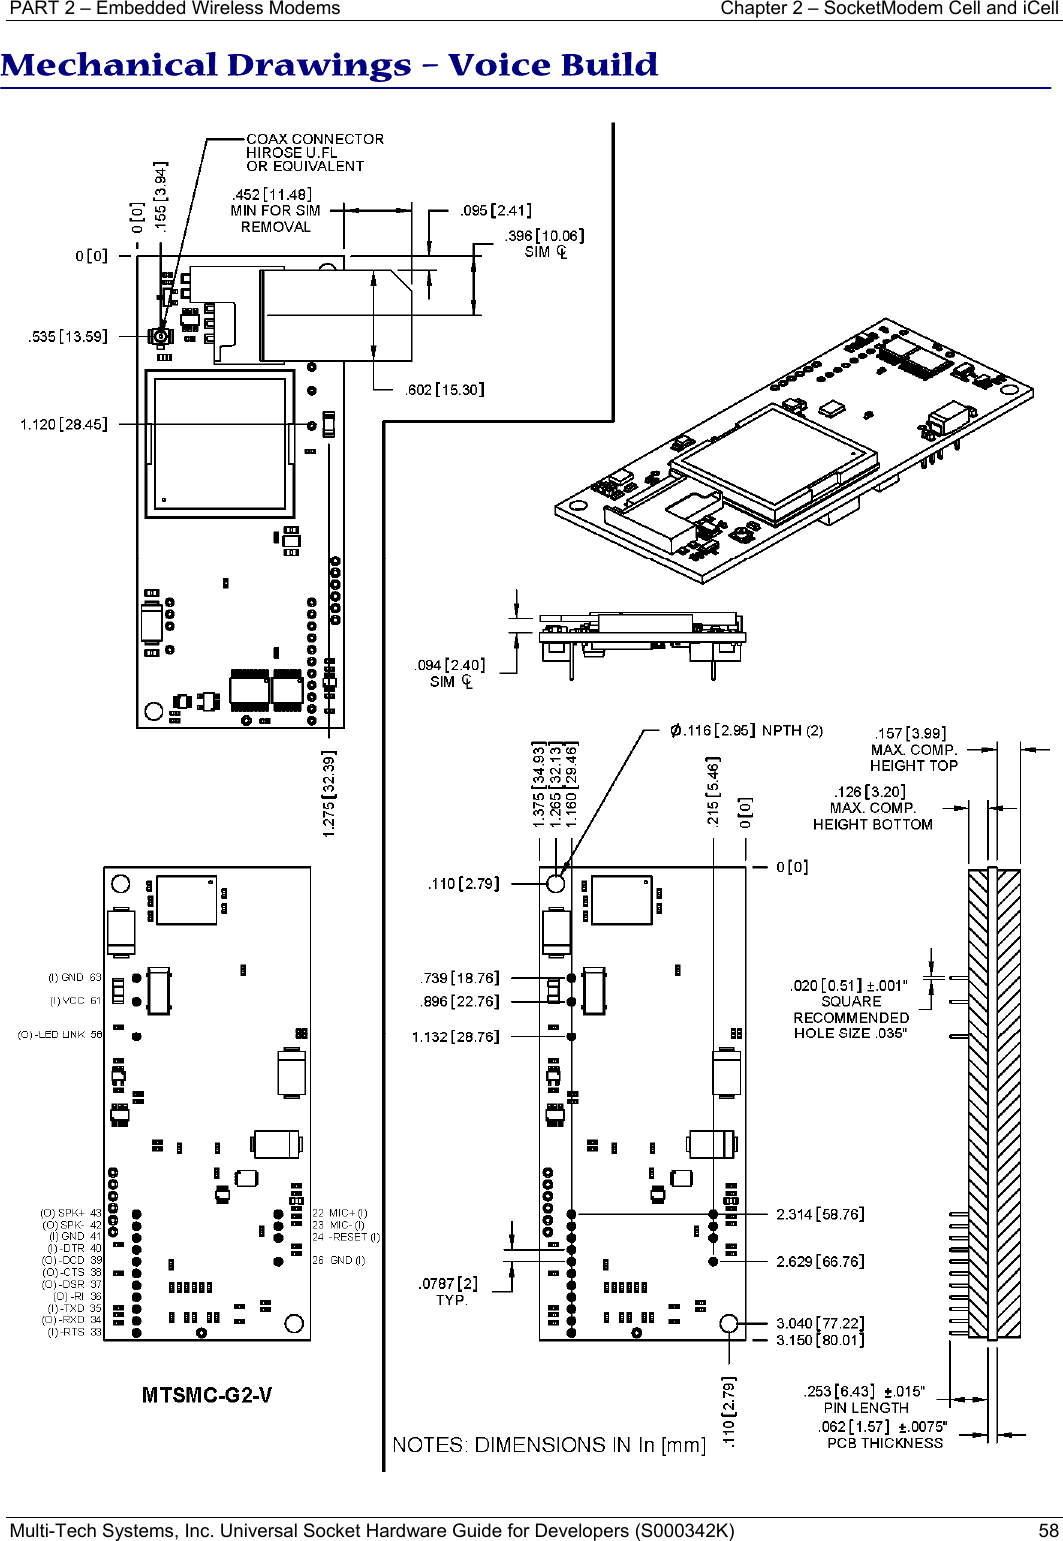 PART 2 – Embedded Wireless Modems   Chapter 2 – SocketModem Cell and iCell Multi-Tech Systems, Inc. Universal Socket Hardware Guide for Developers (S000342K)  58   Mechanical Drawings – Voice Build  